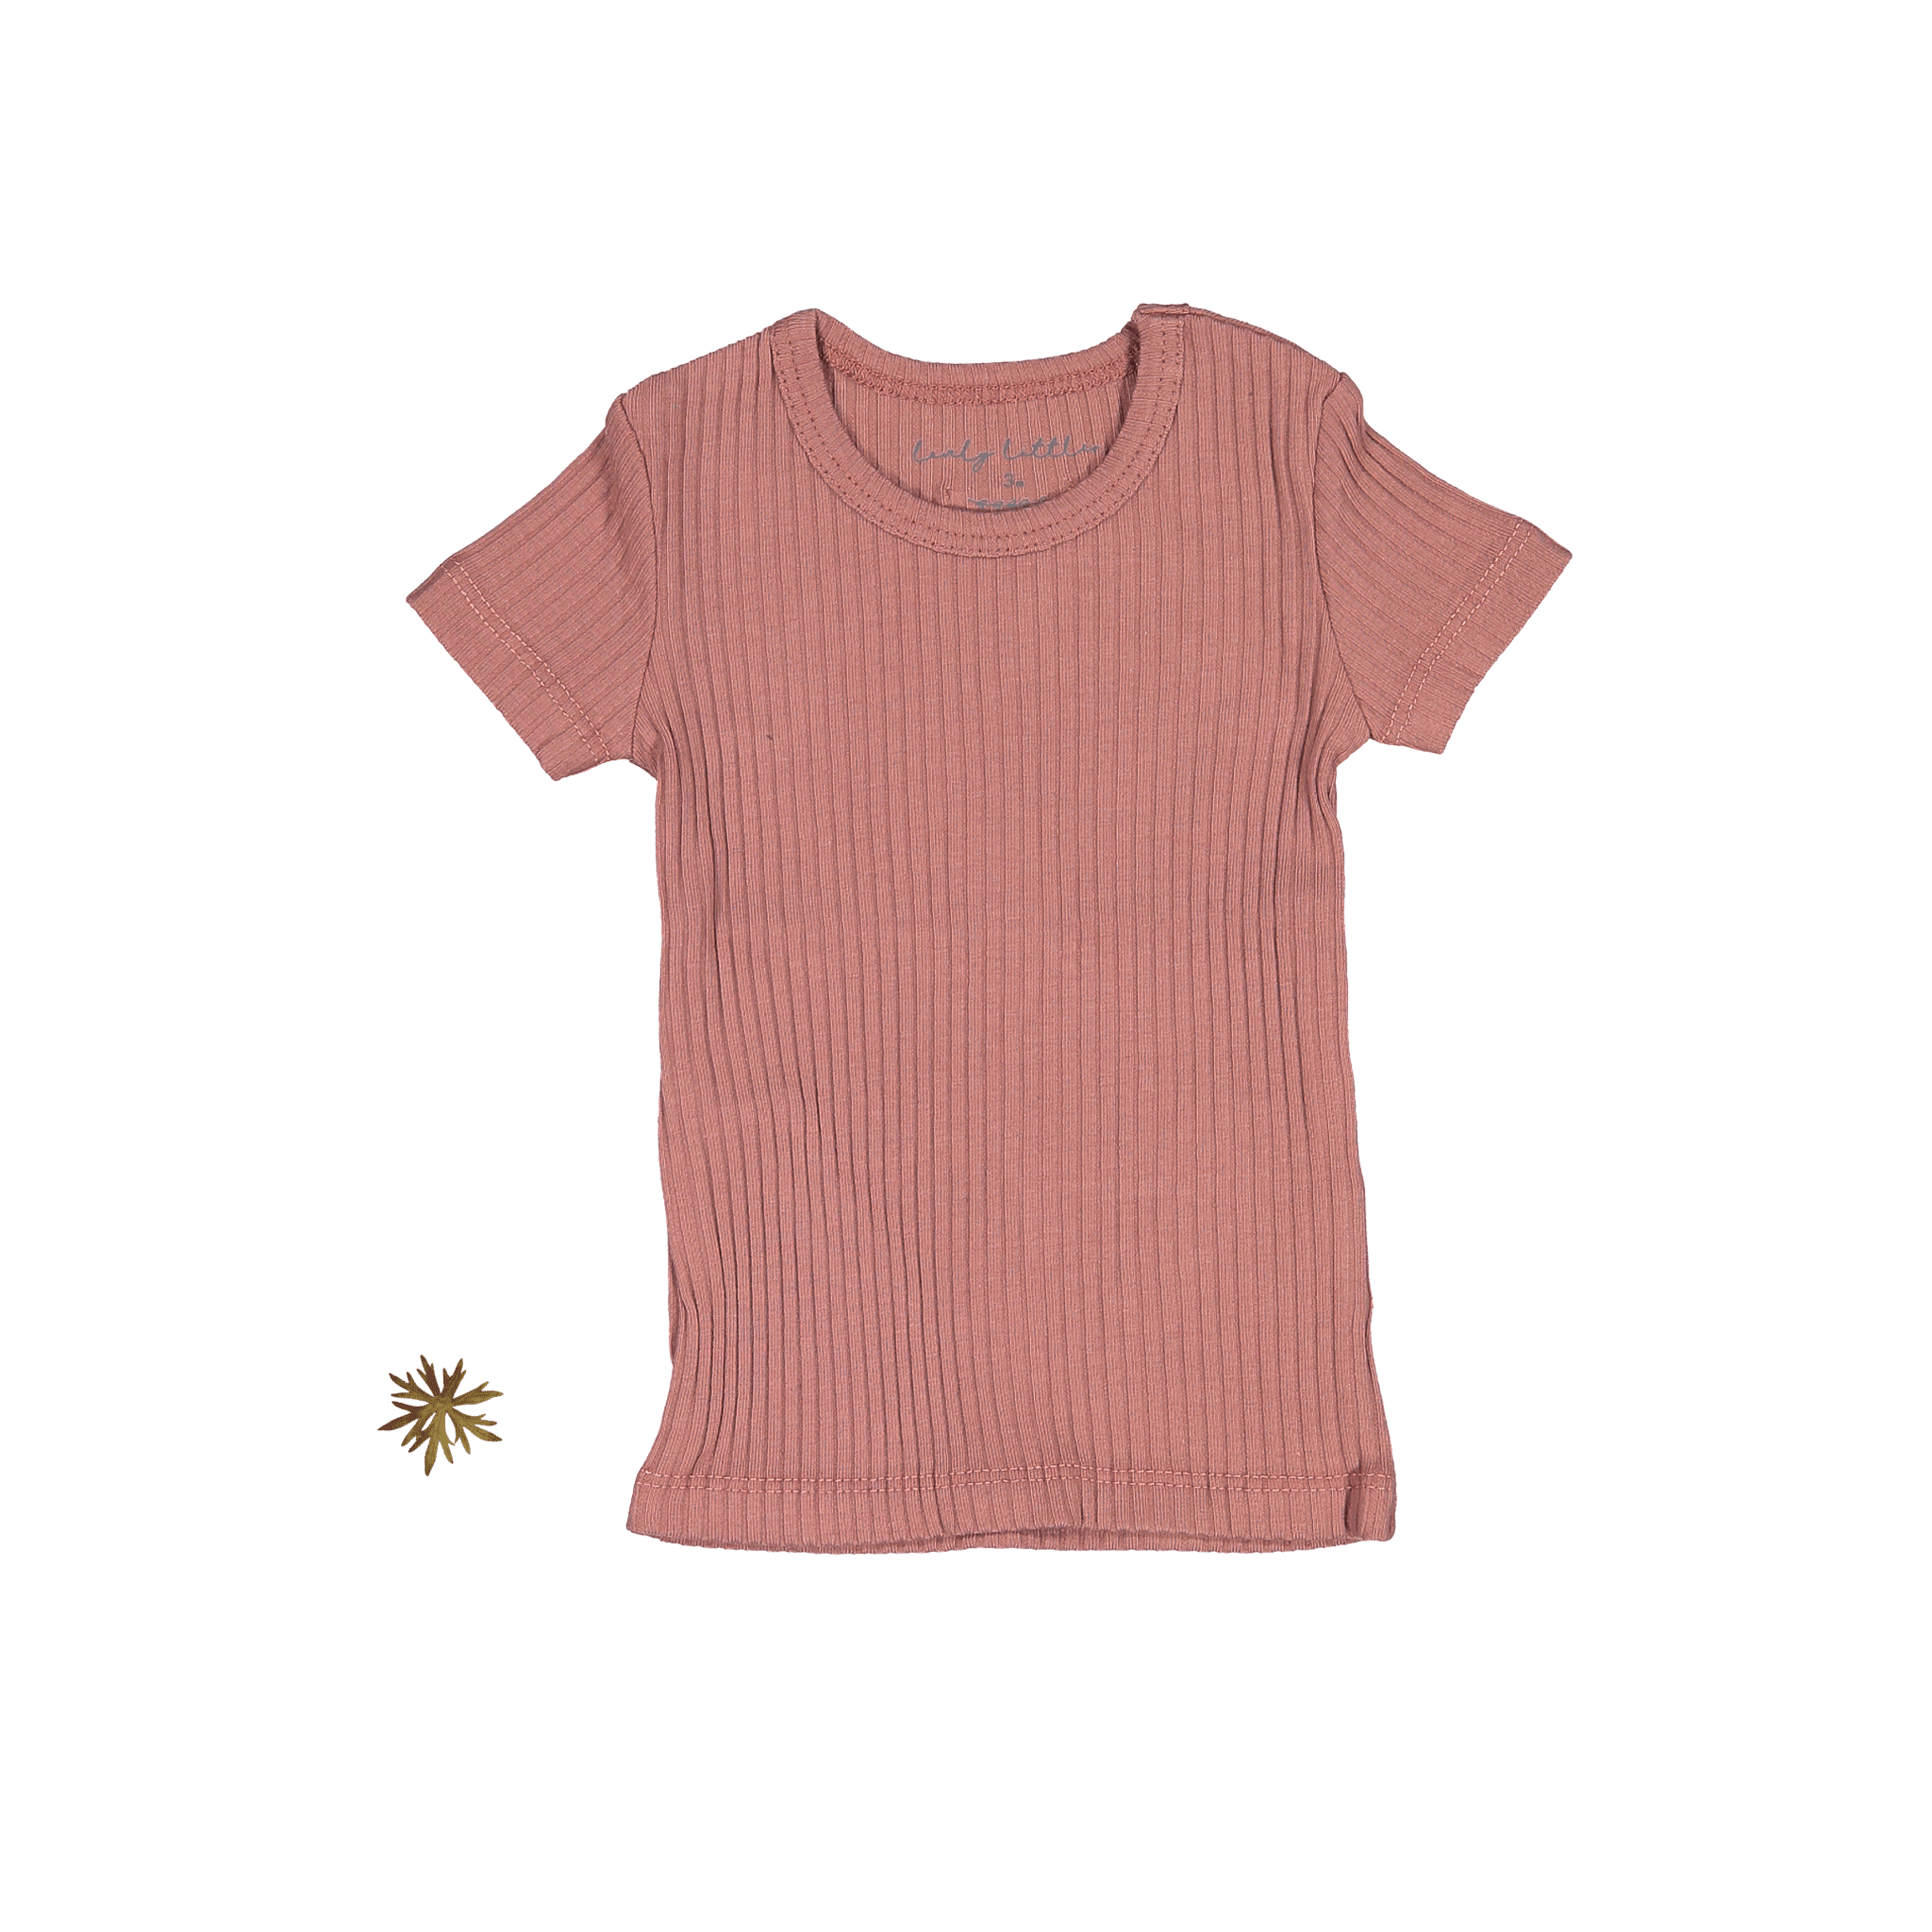 The Short Sleeve Tee - Rosewood Ribbed